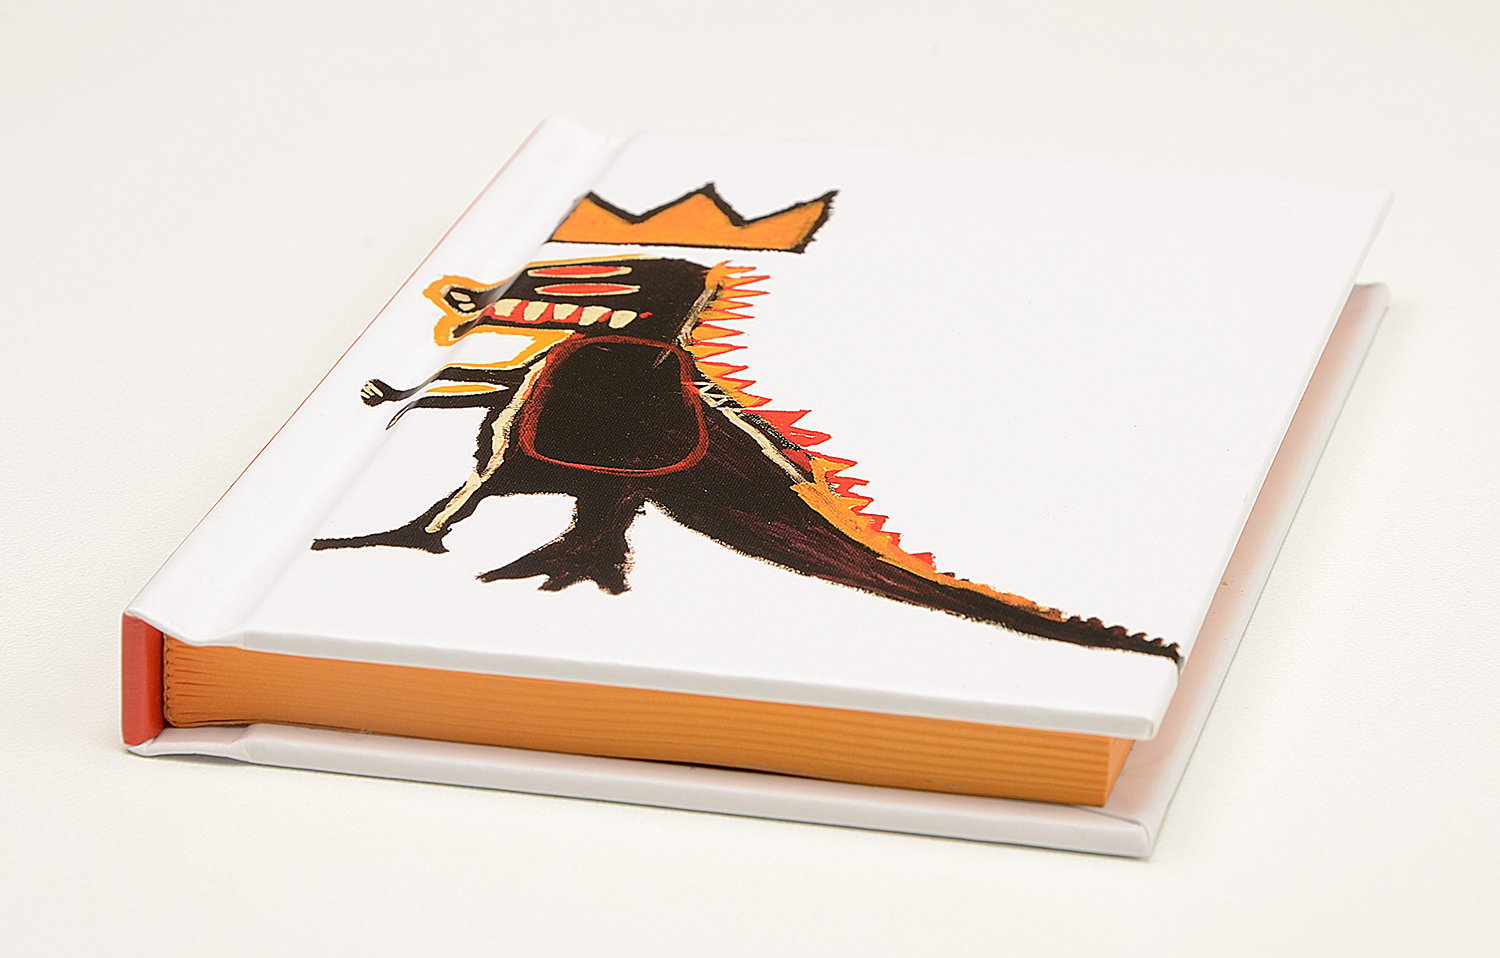 White cover with a quirky bold illustration of a black dinosaur with red eyes with a gold crown above him